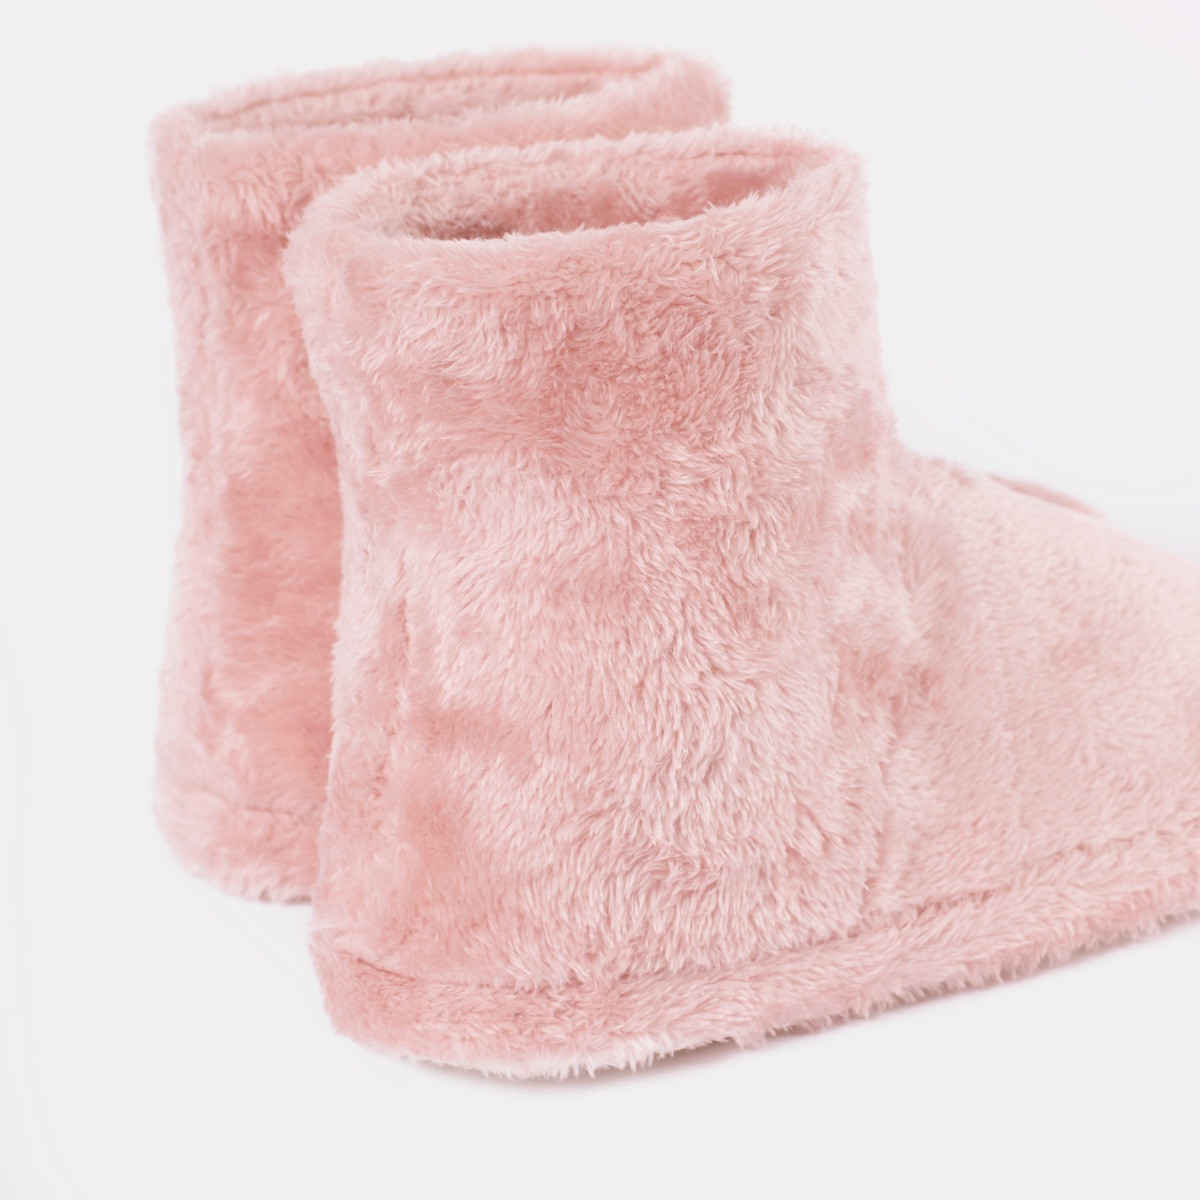 OHS Teddy Boot Slippers - Blush>